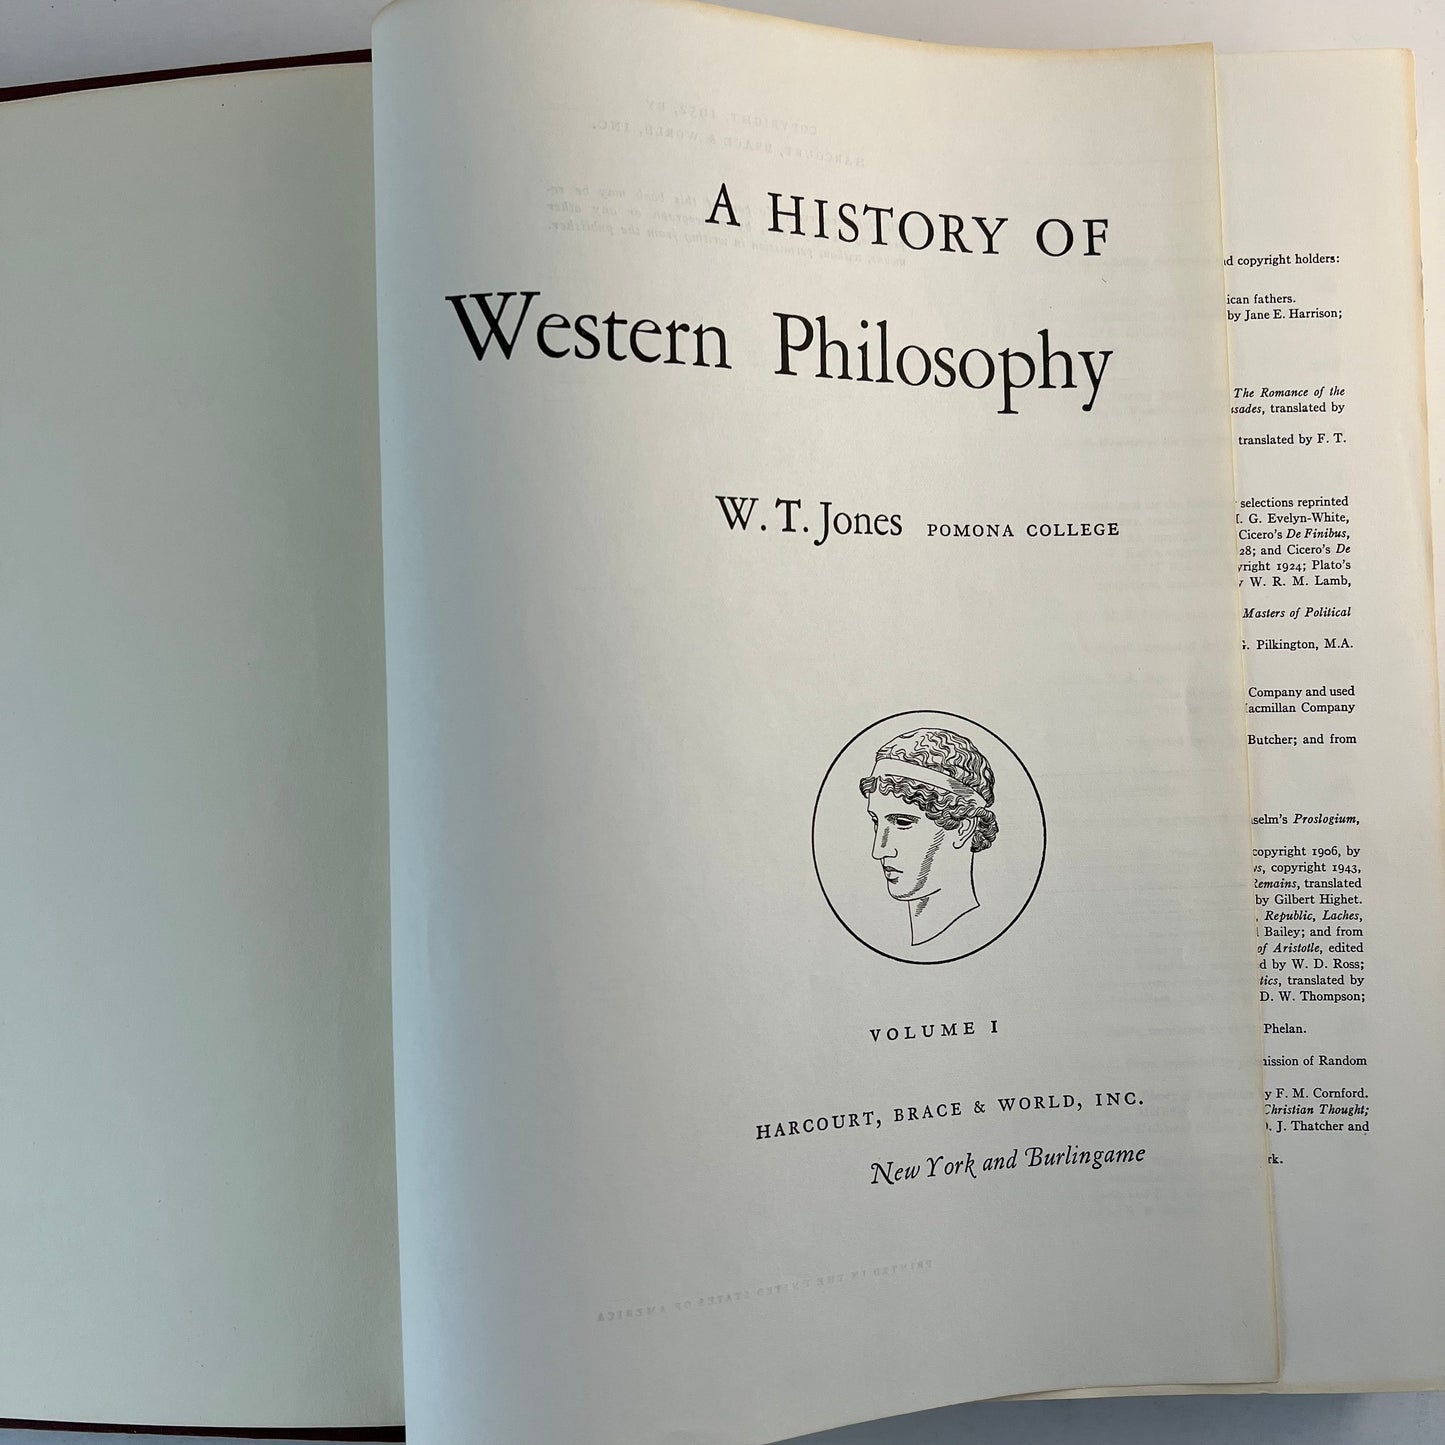 A History of Western Philosophy: Volume I